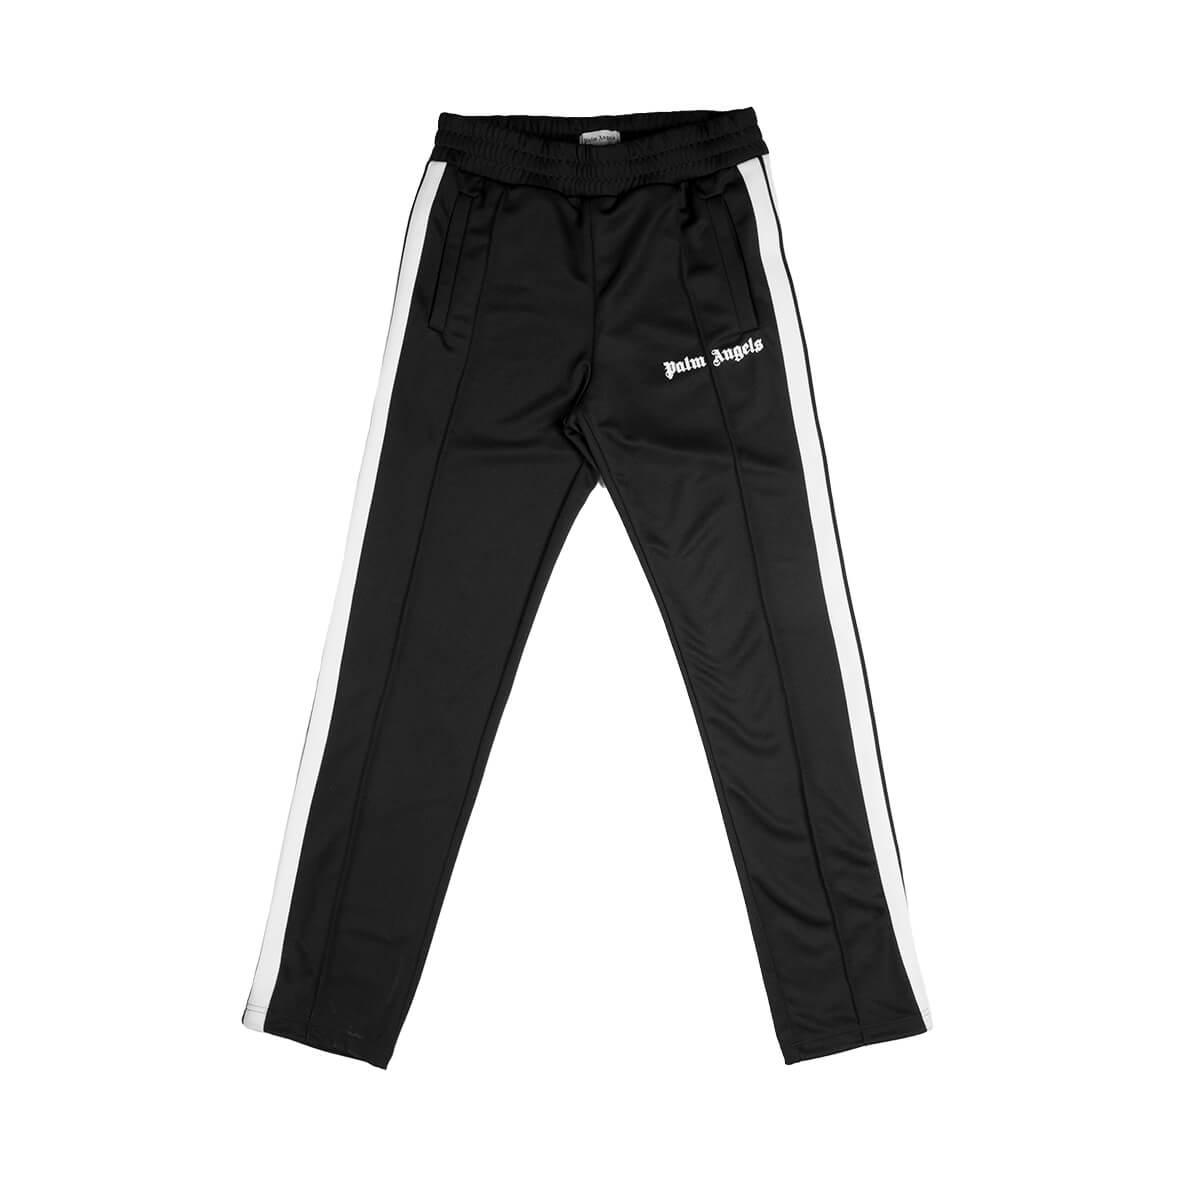 Lyst - Palm Angels Classic Track Pants in Black for Men